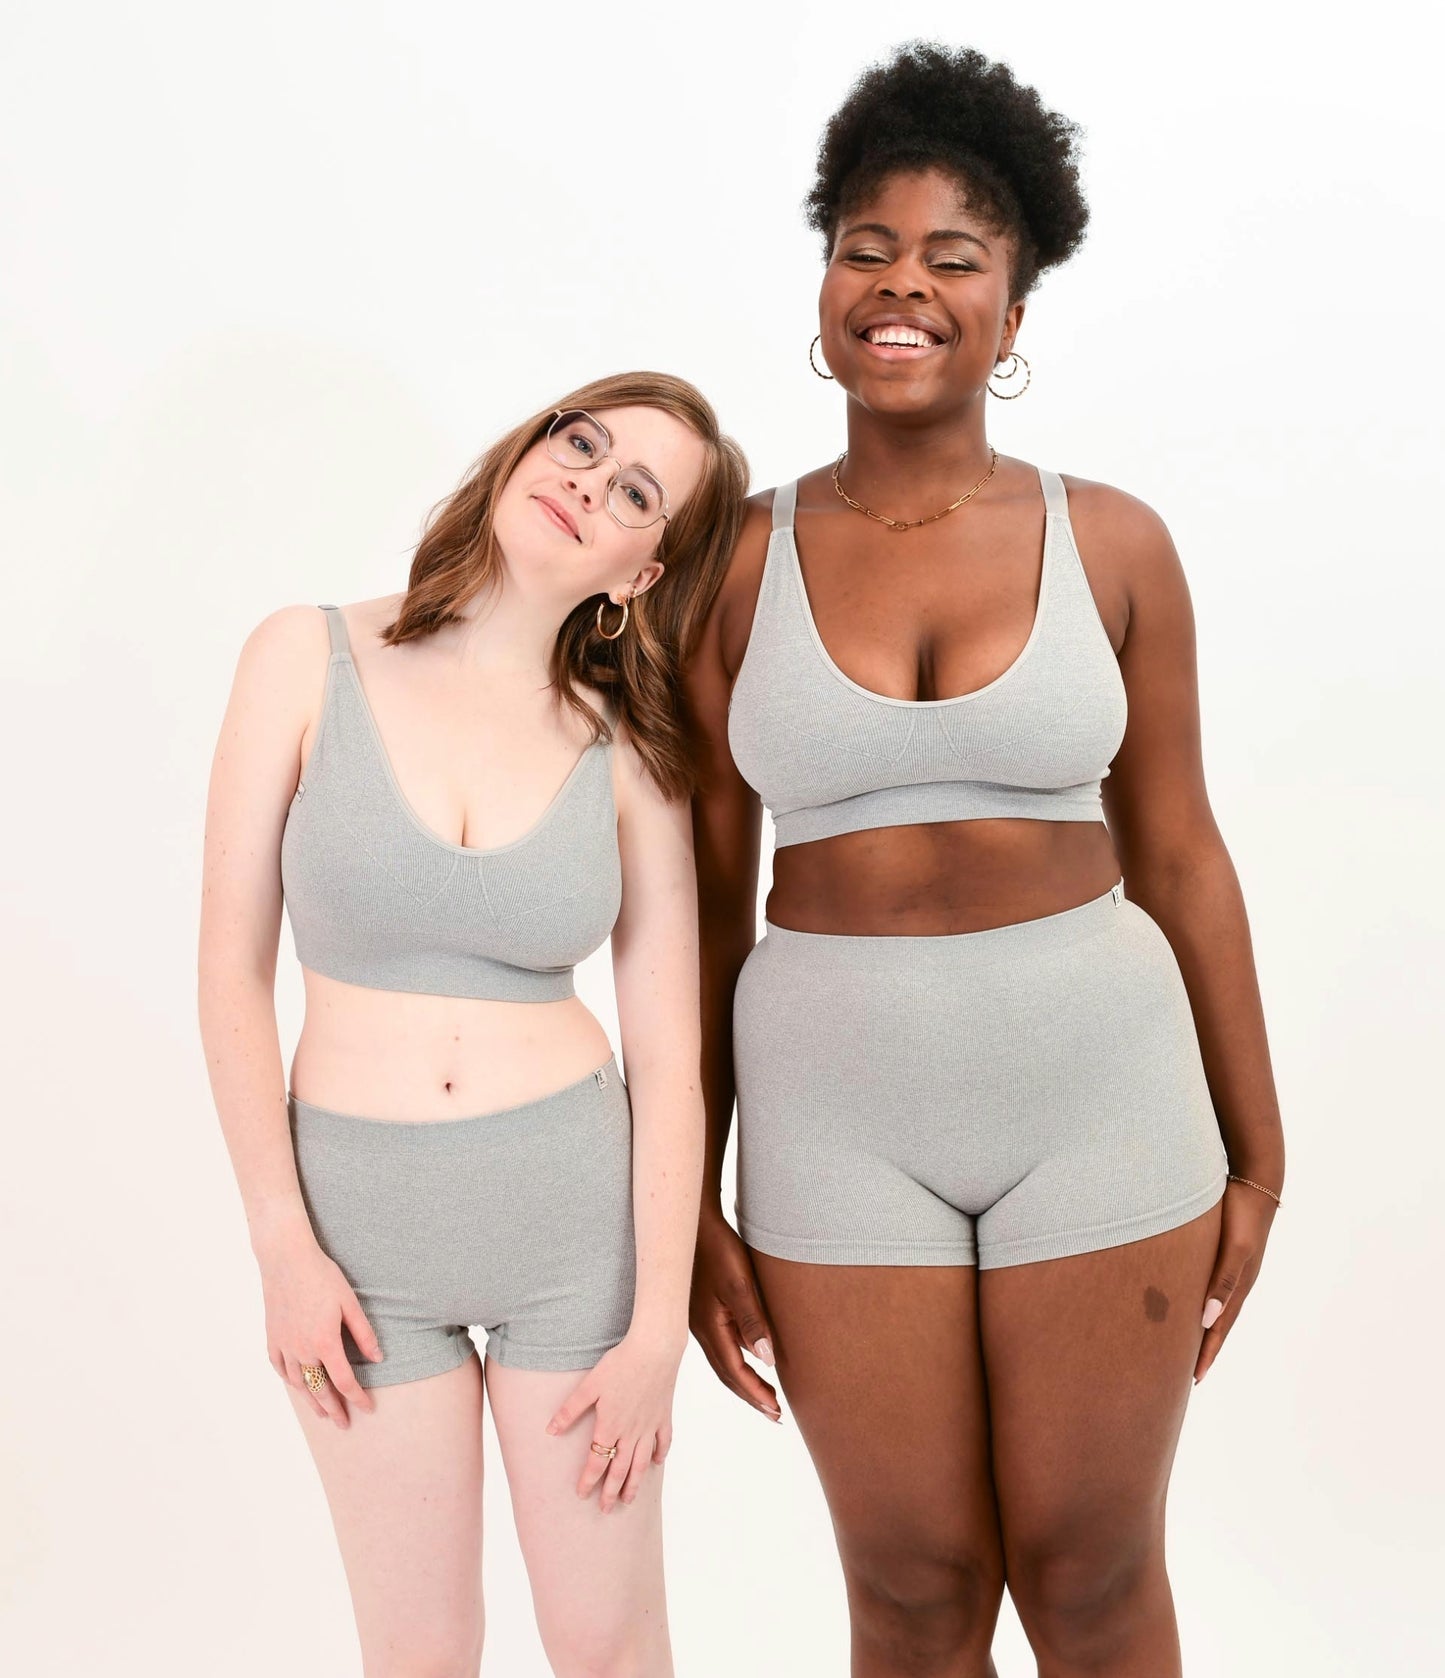 Pack ensemble Doodie queen - Brassière + Shorty + Tanga